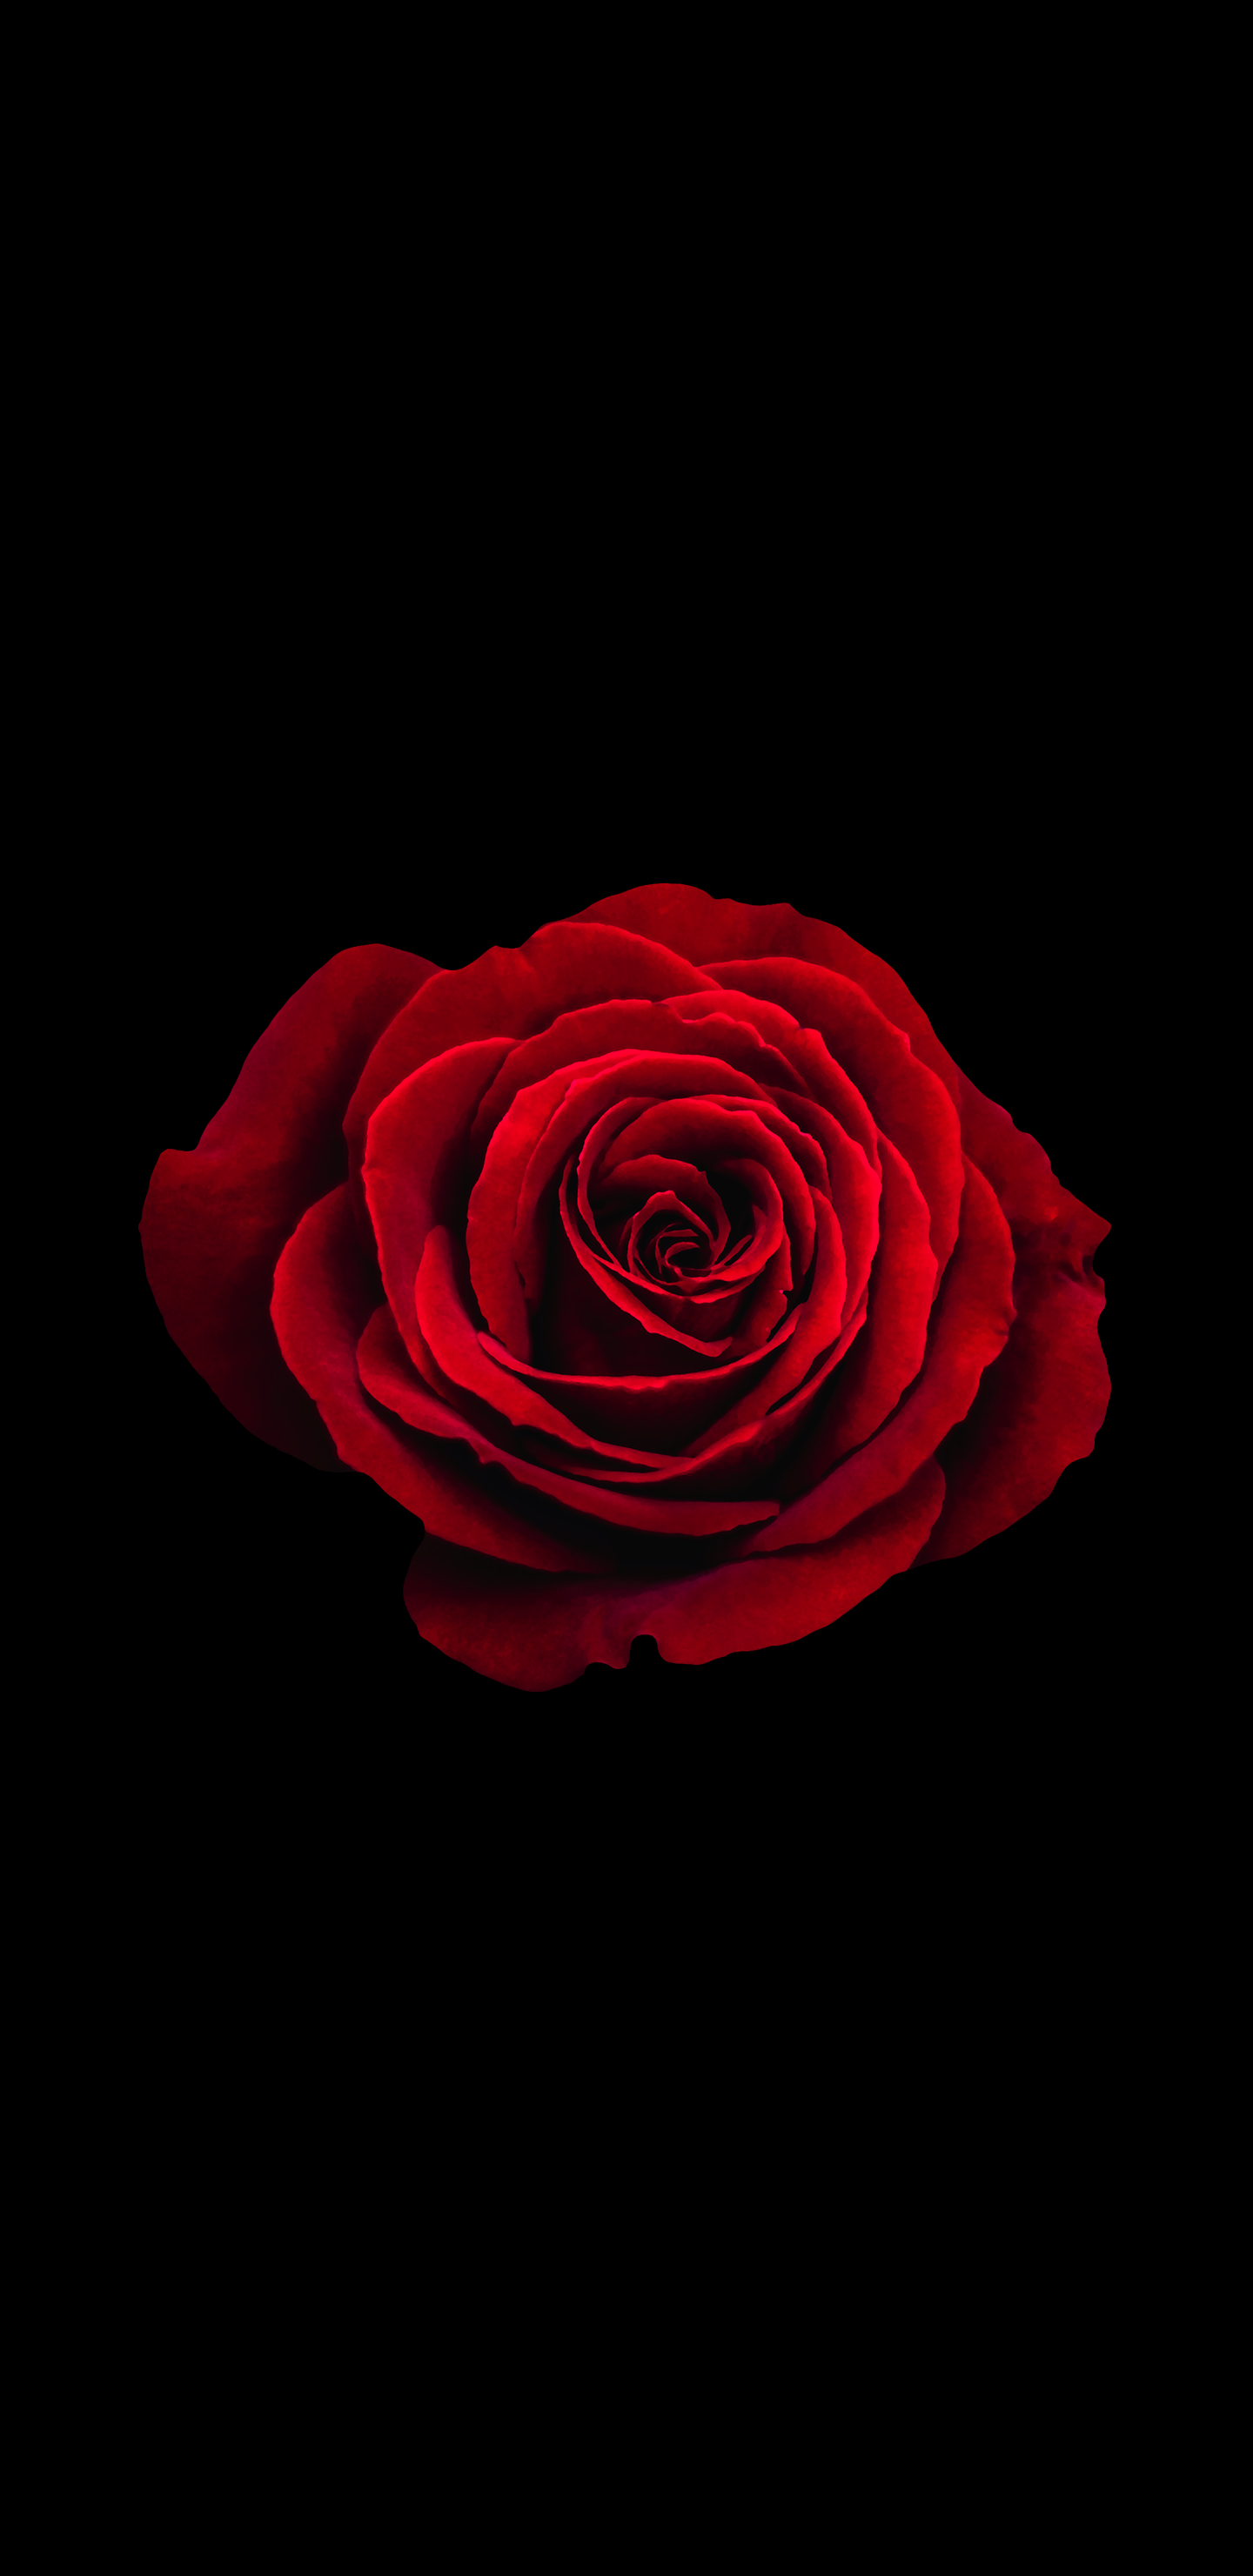 Amoled Rose Wallpapers - Wallpaper Cave